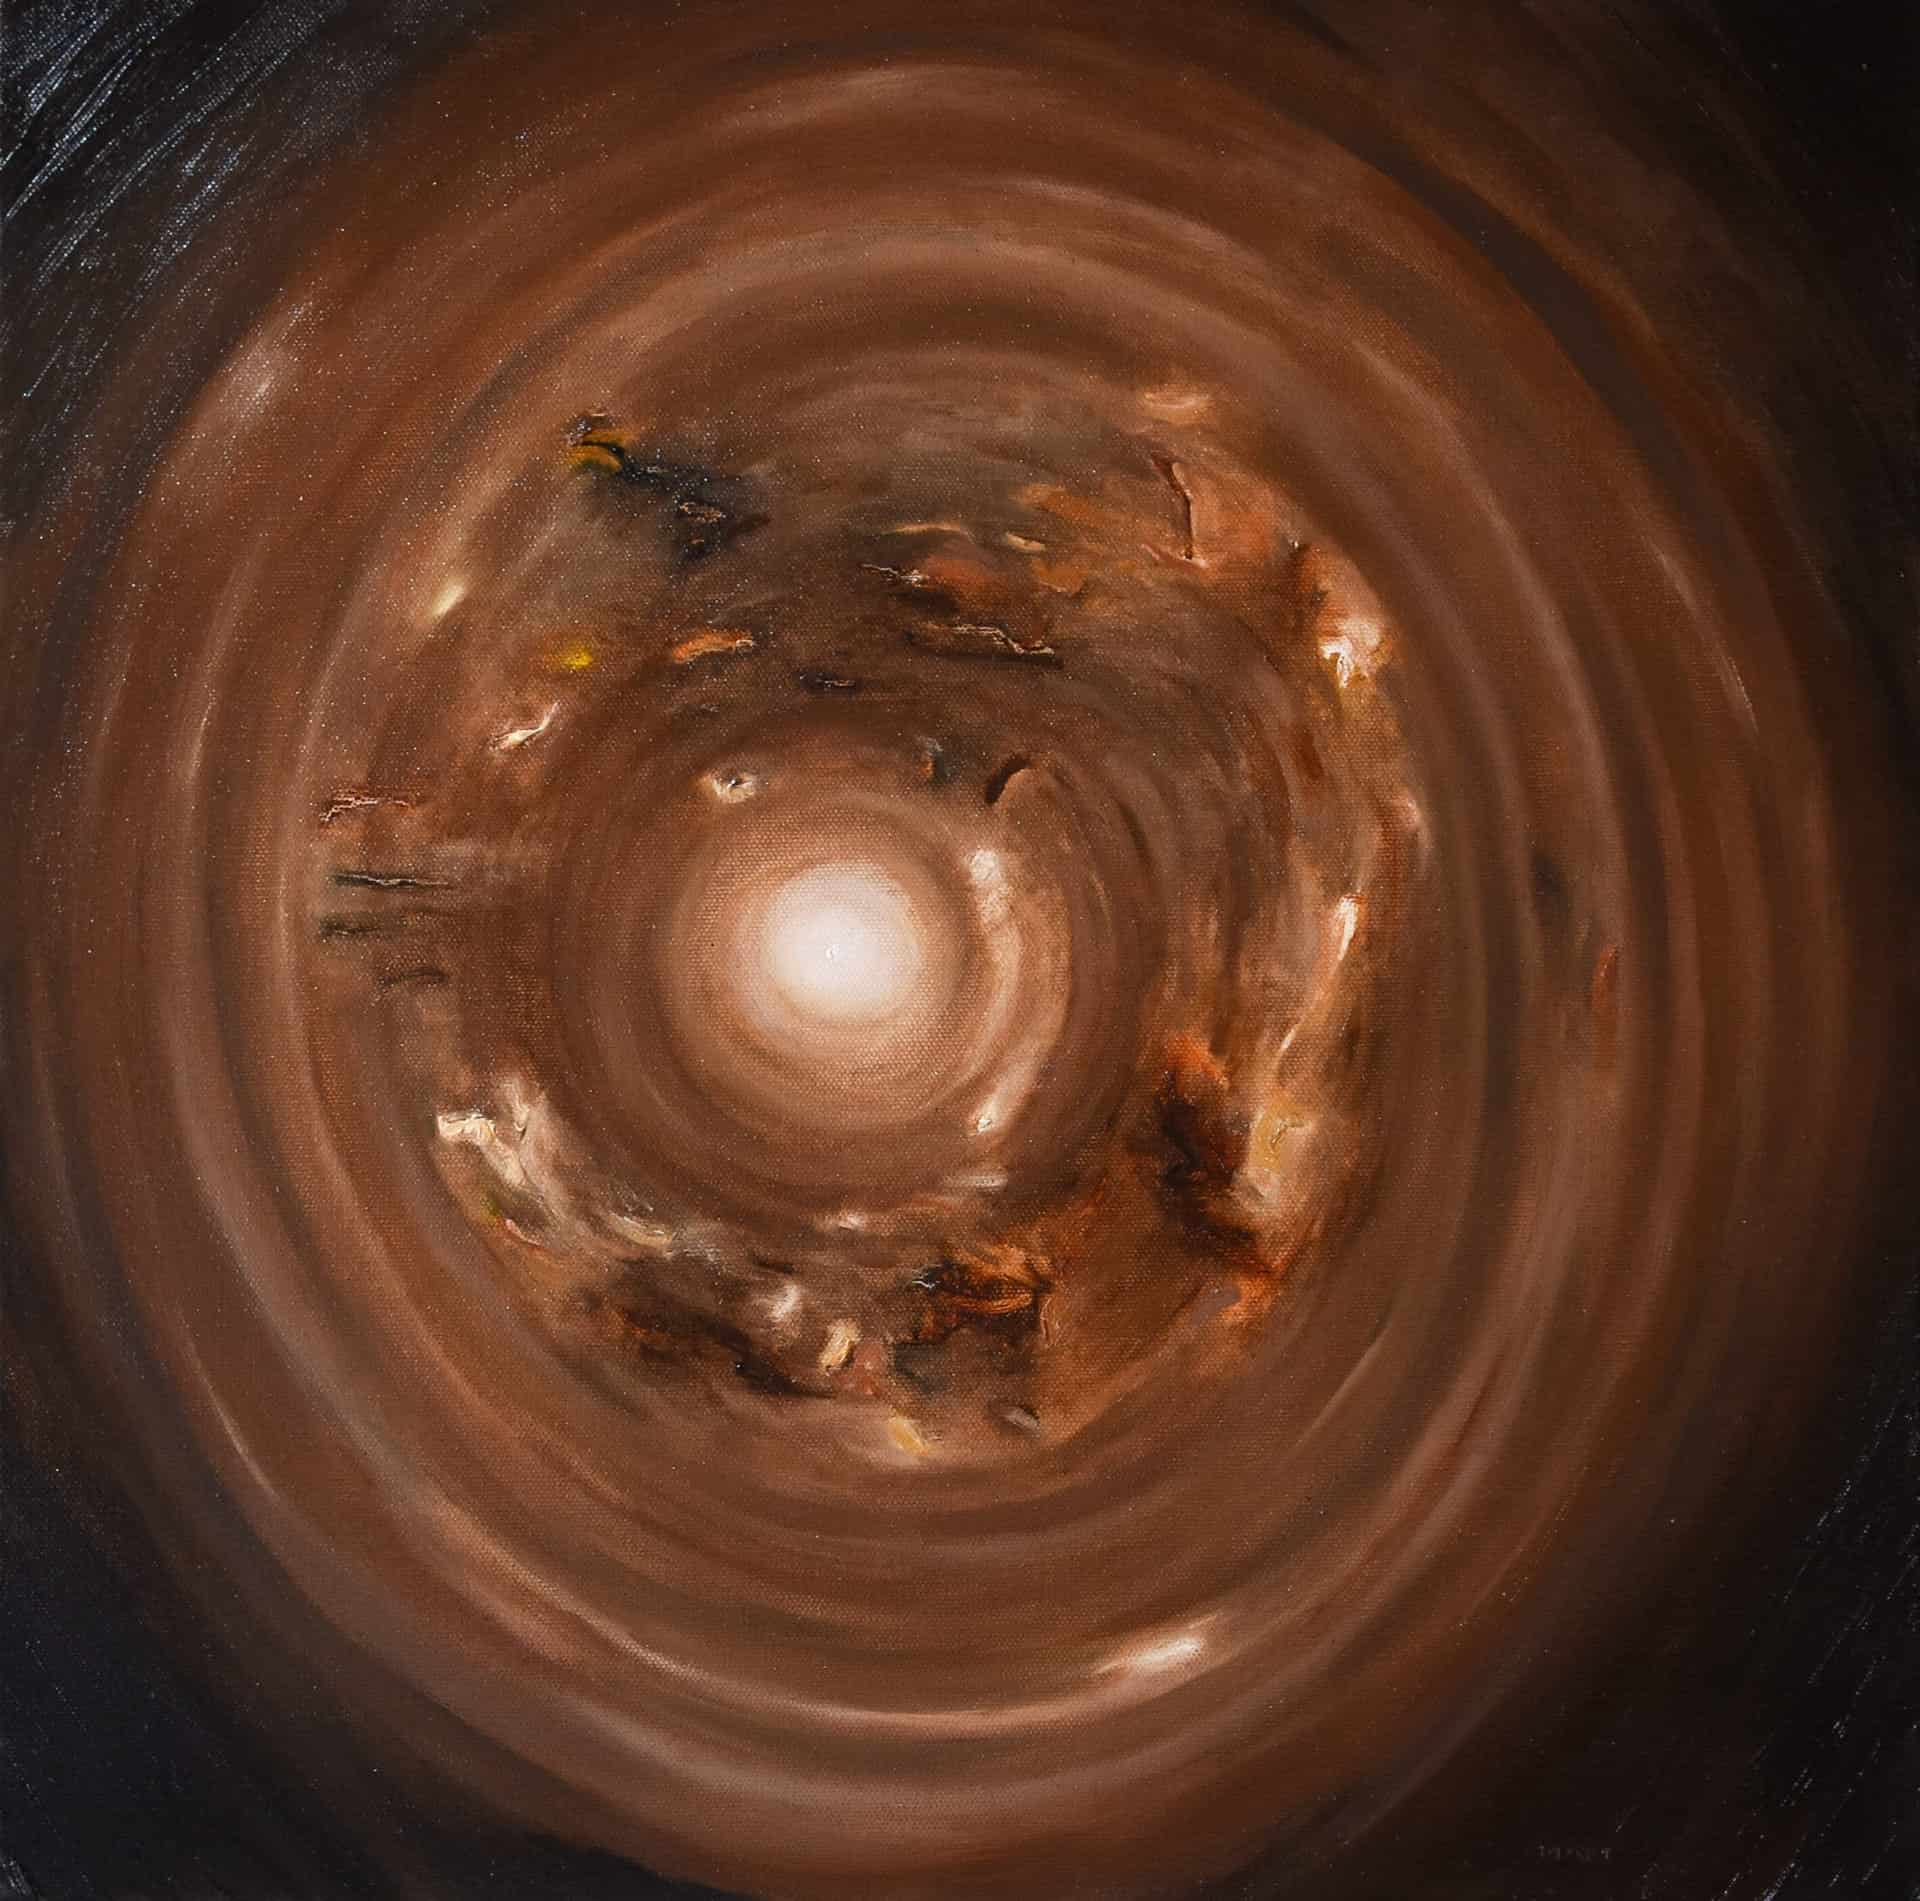 Primordial Sound (Center of the Universe), 2021, Oil on canvas